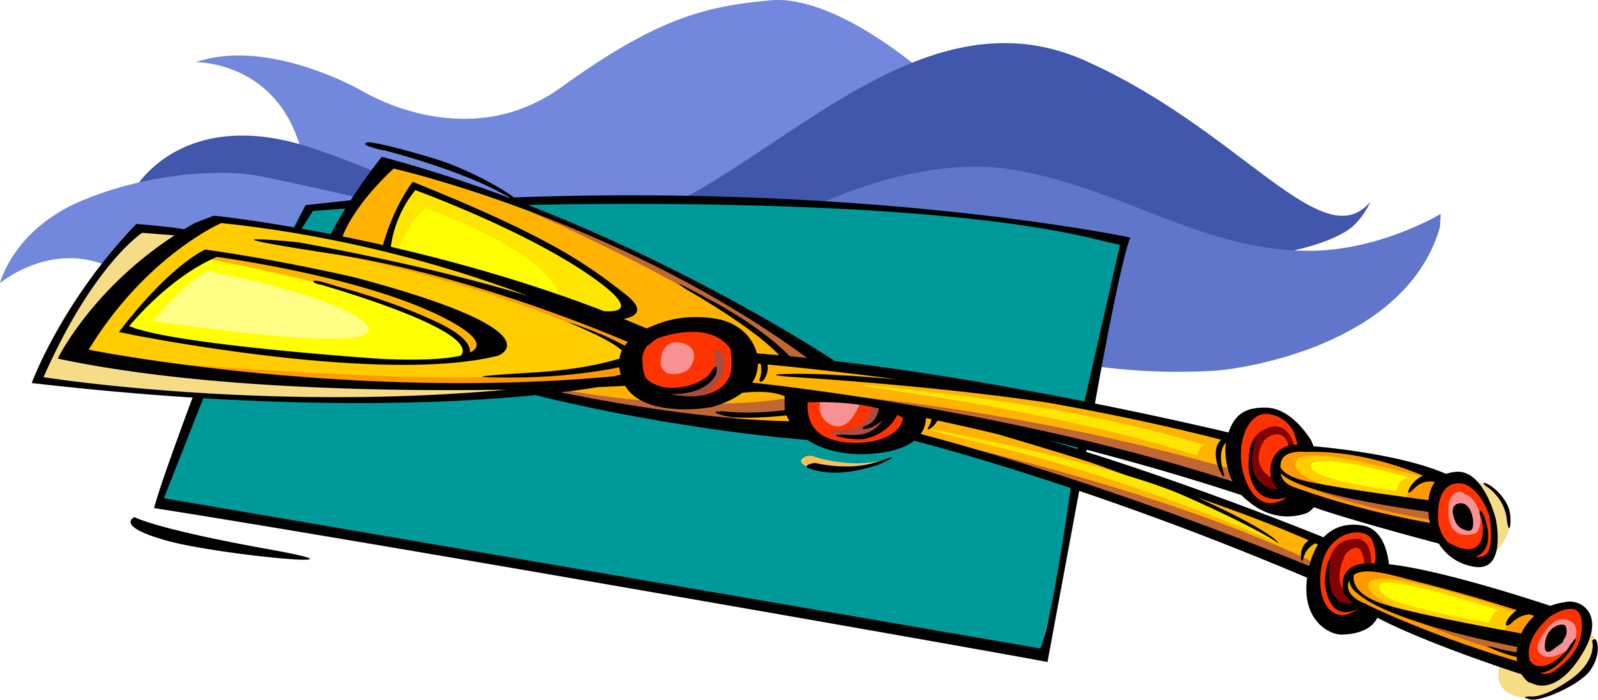 Vector Illustration of Oars or Boat Paddle Implements used for Water-Borne Propulsion